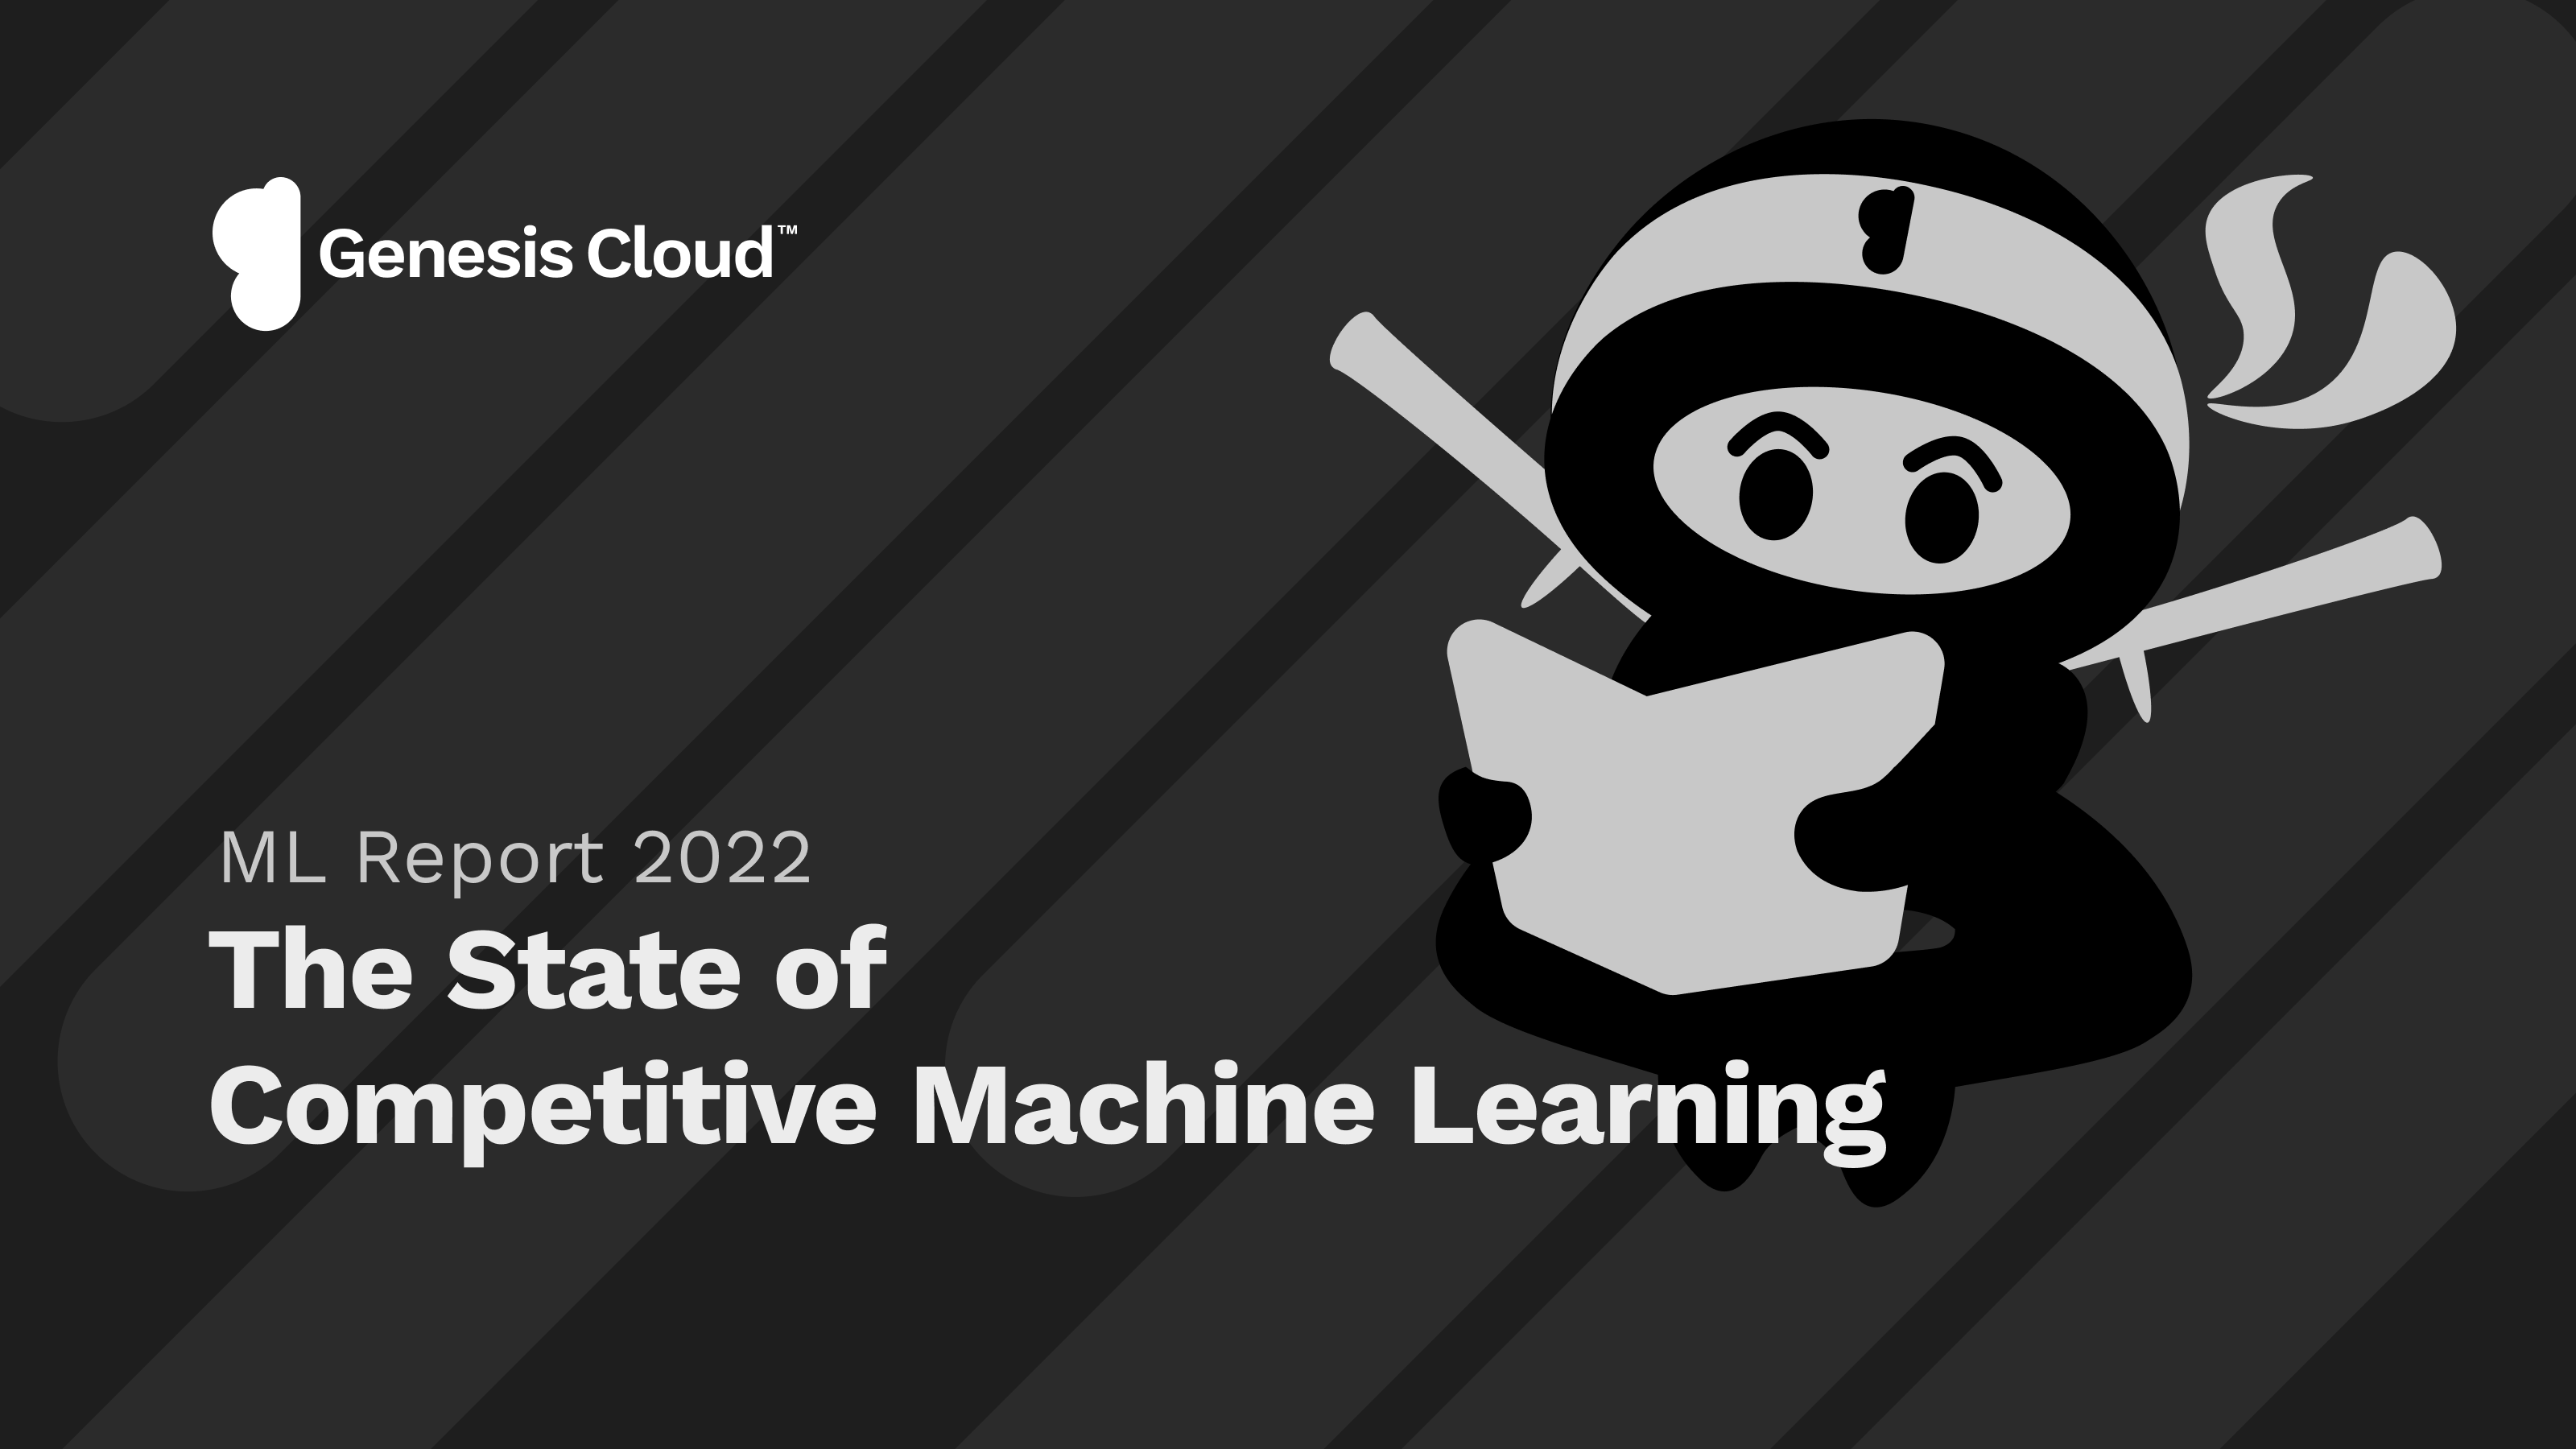 New Study on Competitive Machine Learning in 2022 Sponsored by Genesis Cloud: Insights and Strategies for Success